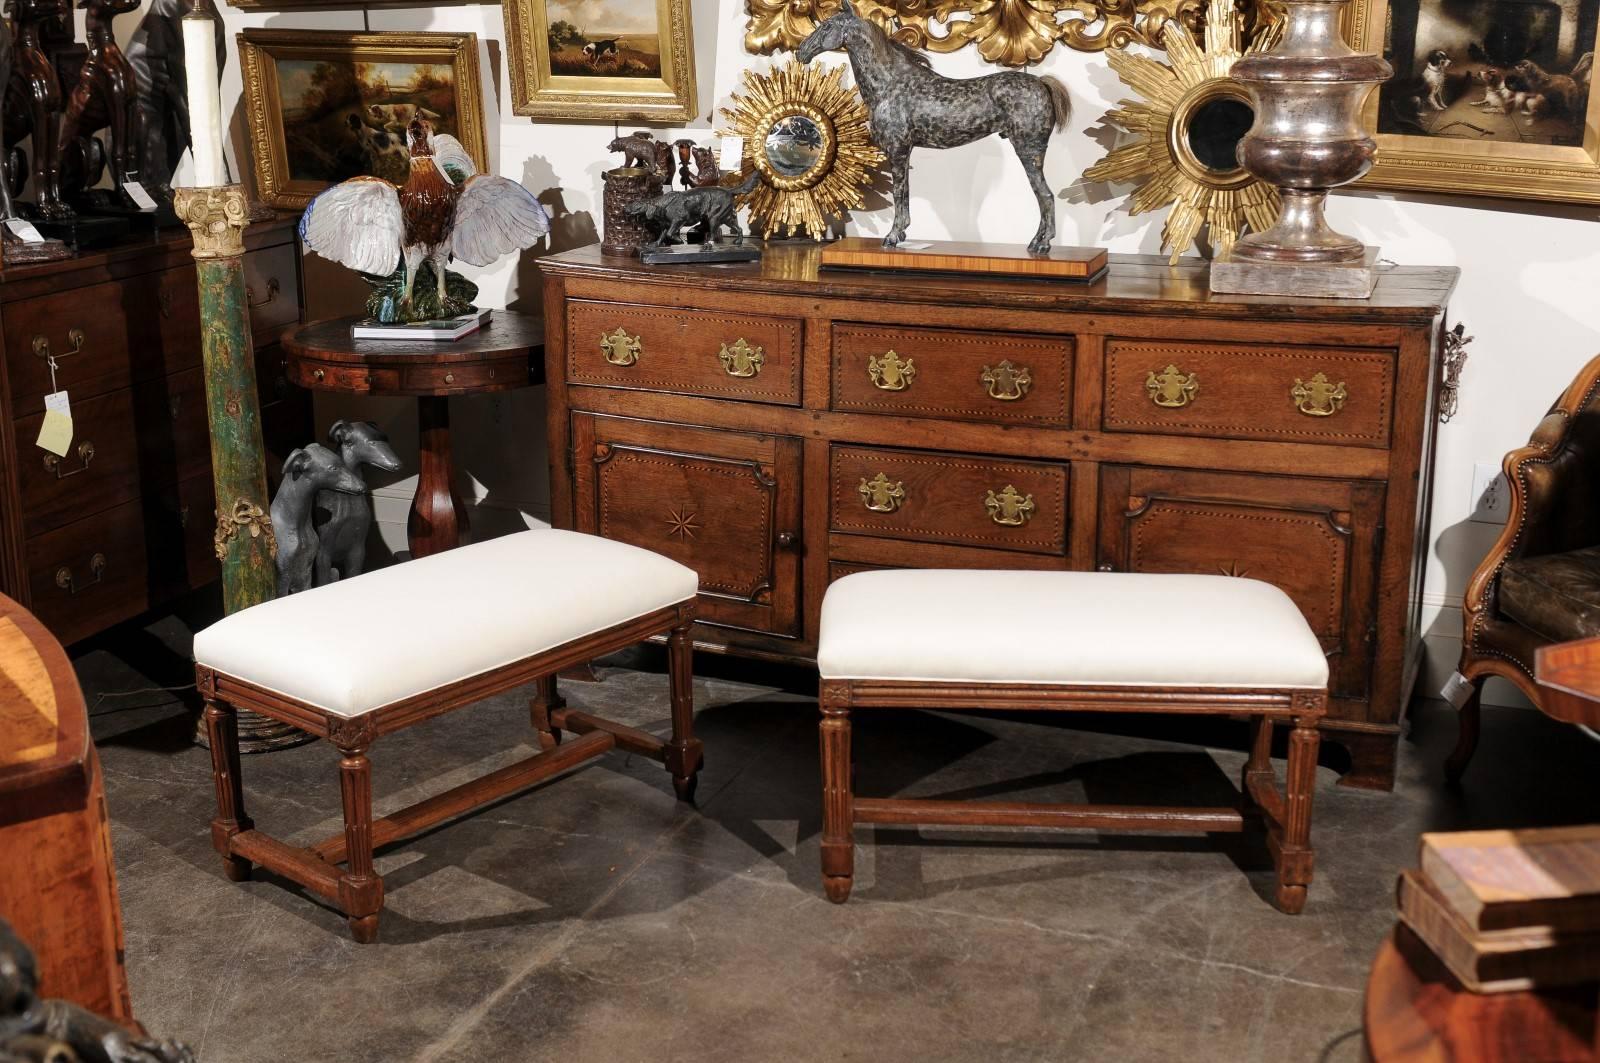 Louis XVI Pair of Italian Walnut Upholstered Wooden Benches from the Early 19th Century